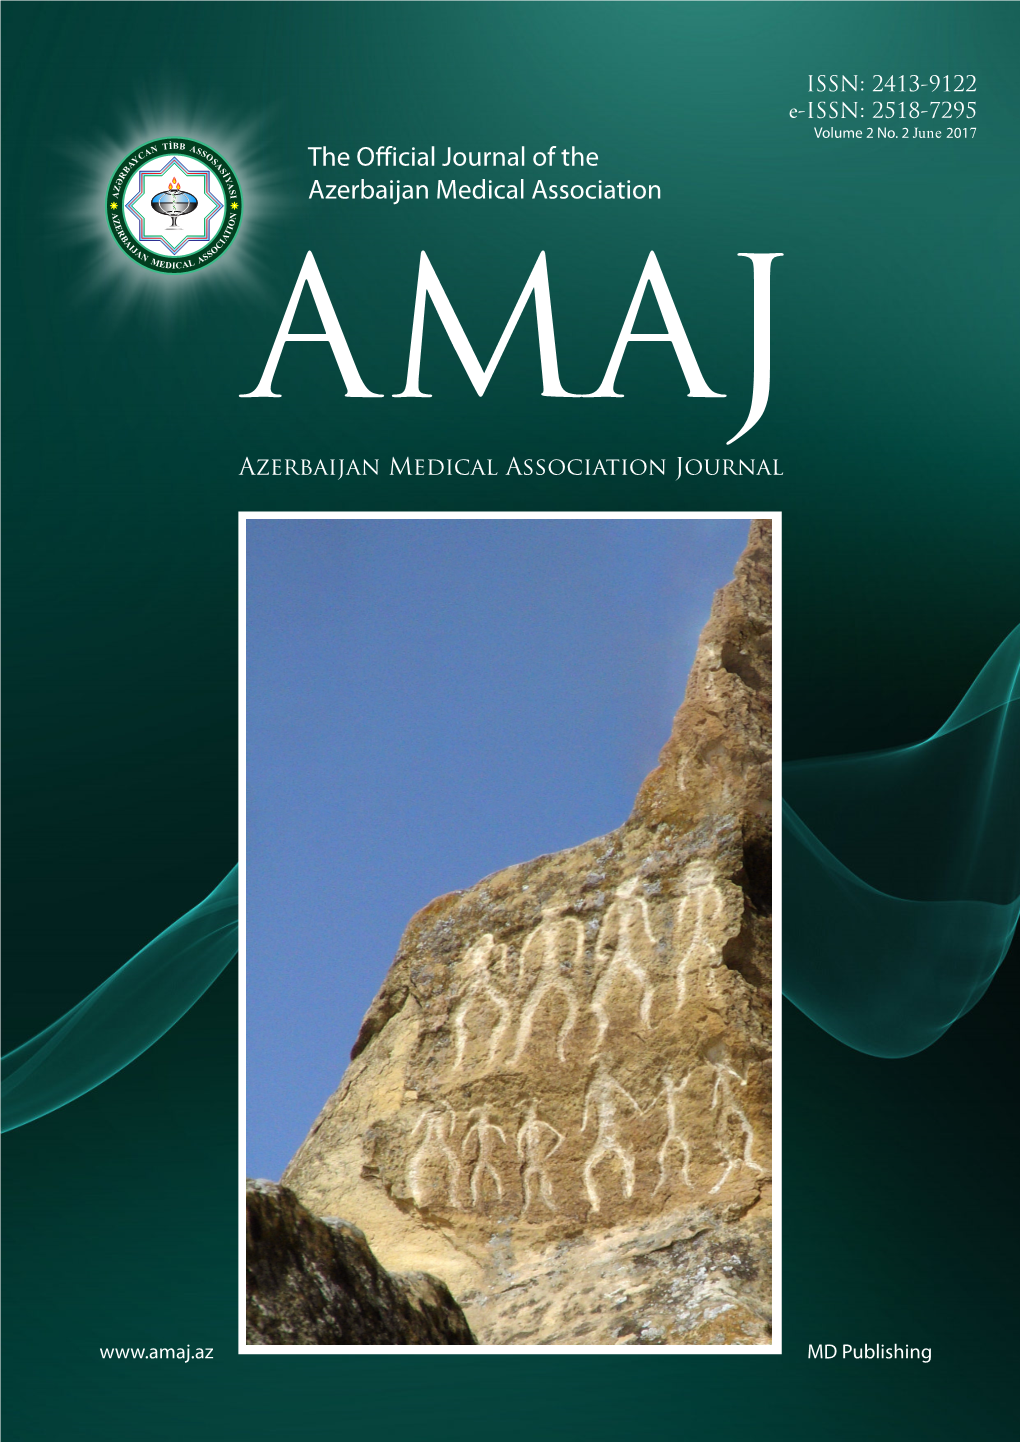 The Off C Al Journal of the Azerba Jan Med Cal Assoc at On